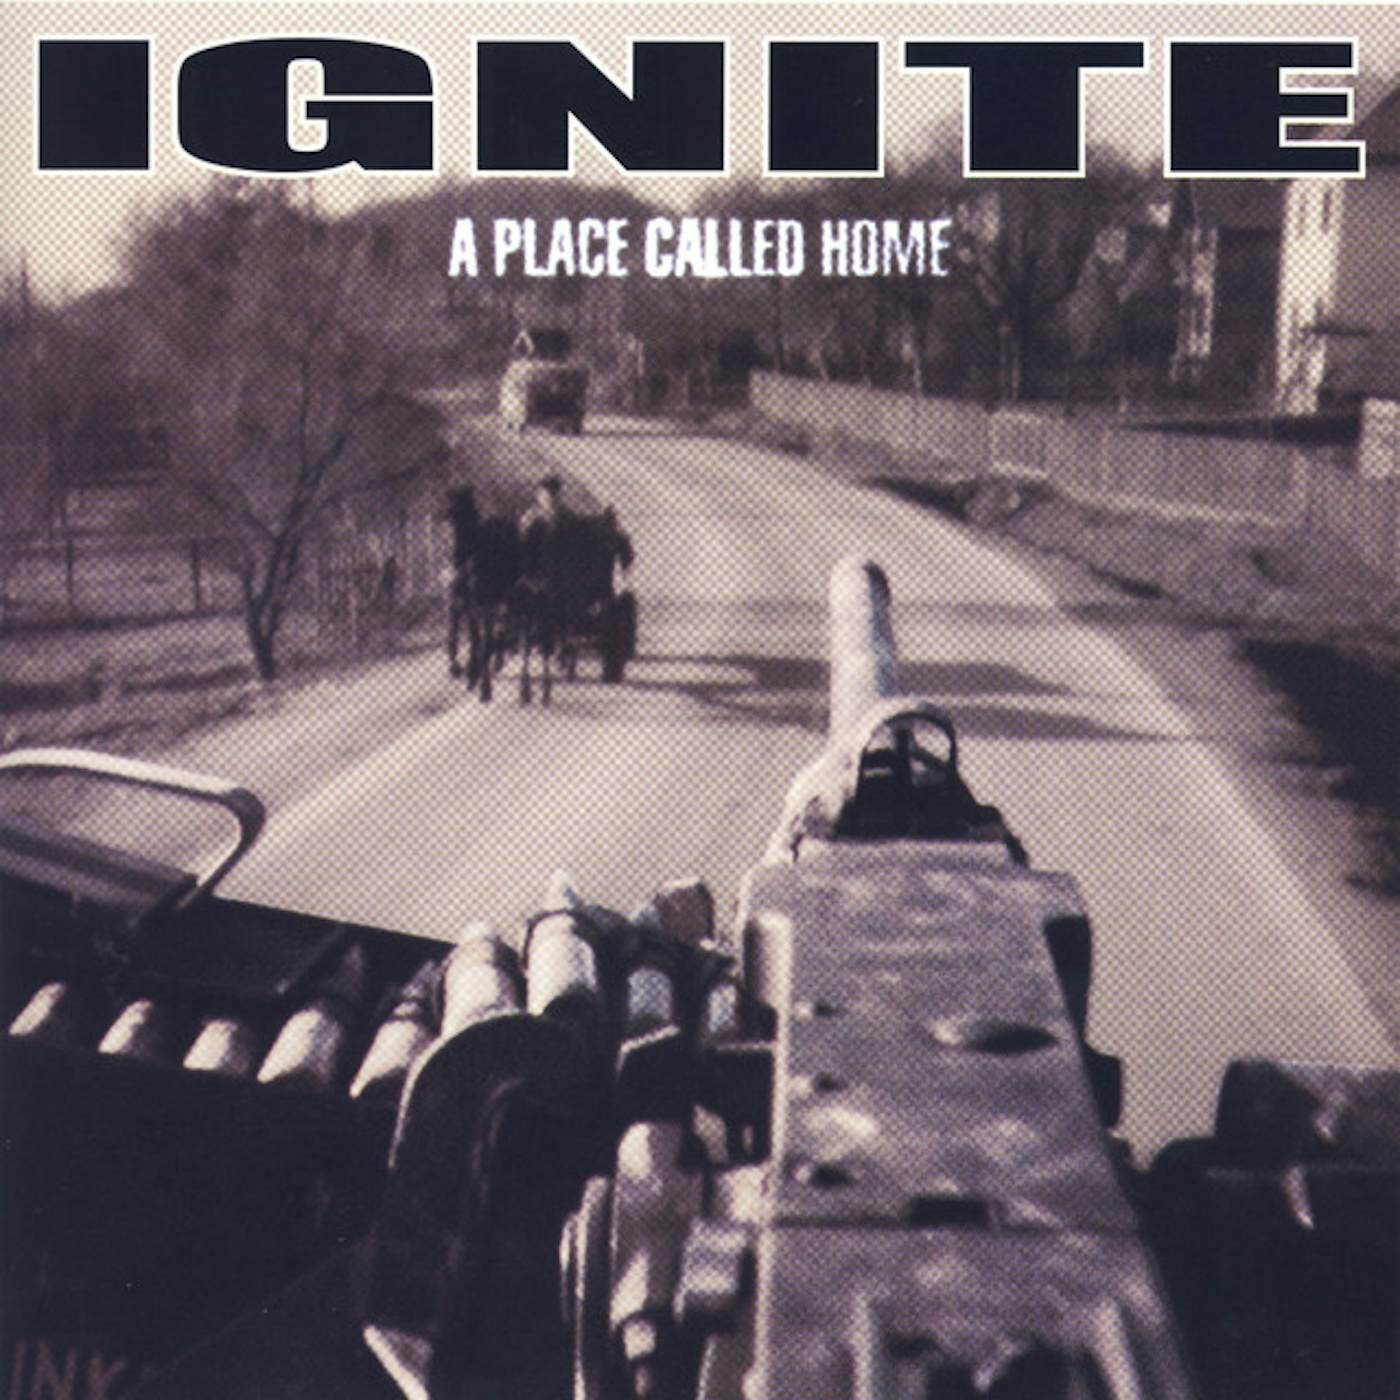 Ignite A Place Called Home Vinyl Record